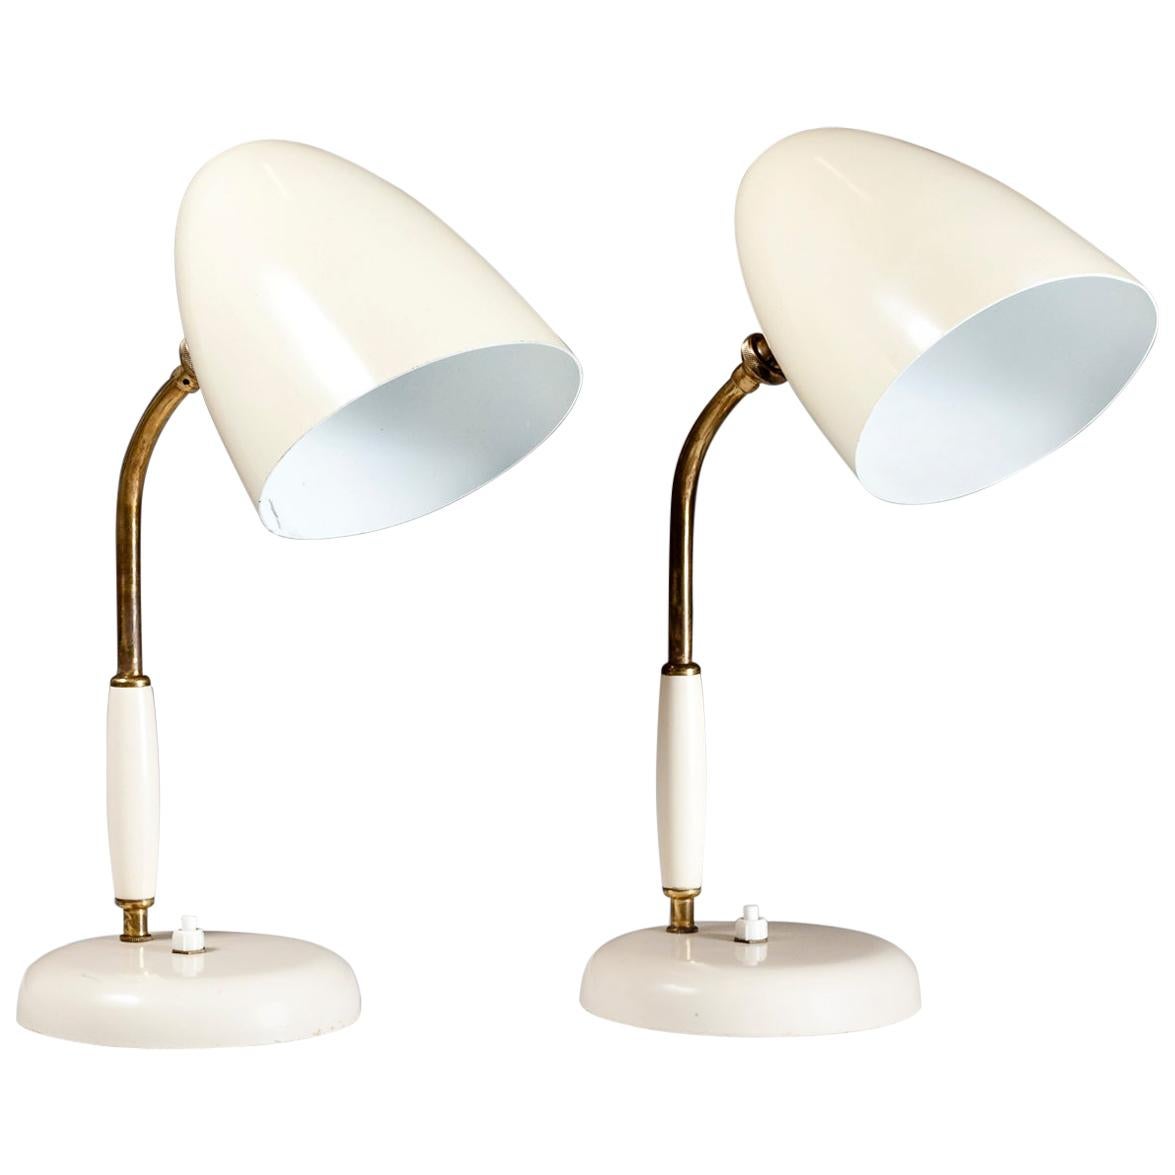 Pair of Finnish White Mid-Century Modern Table Lamps by Stockmann Oy, Finland